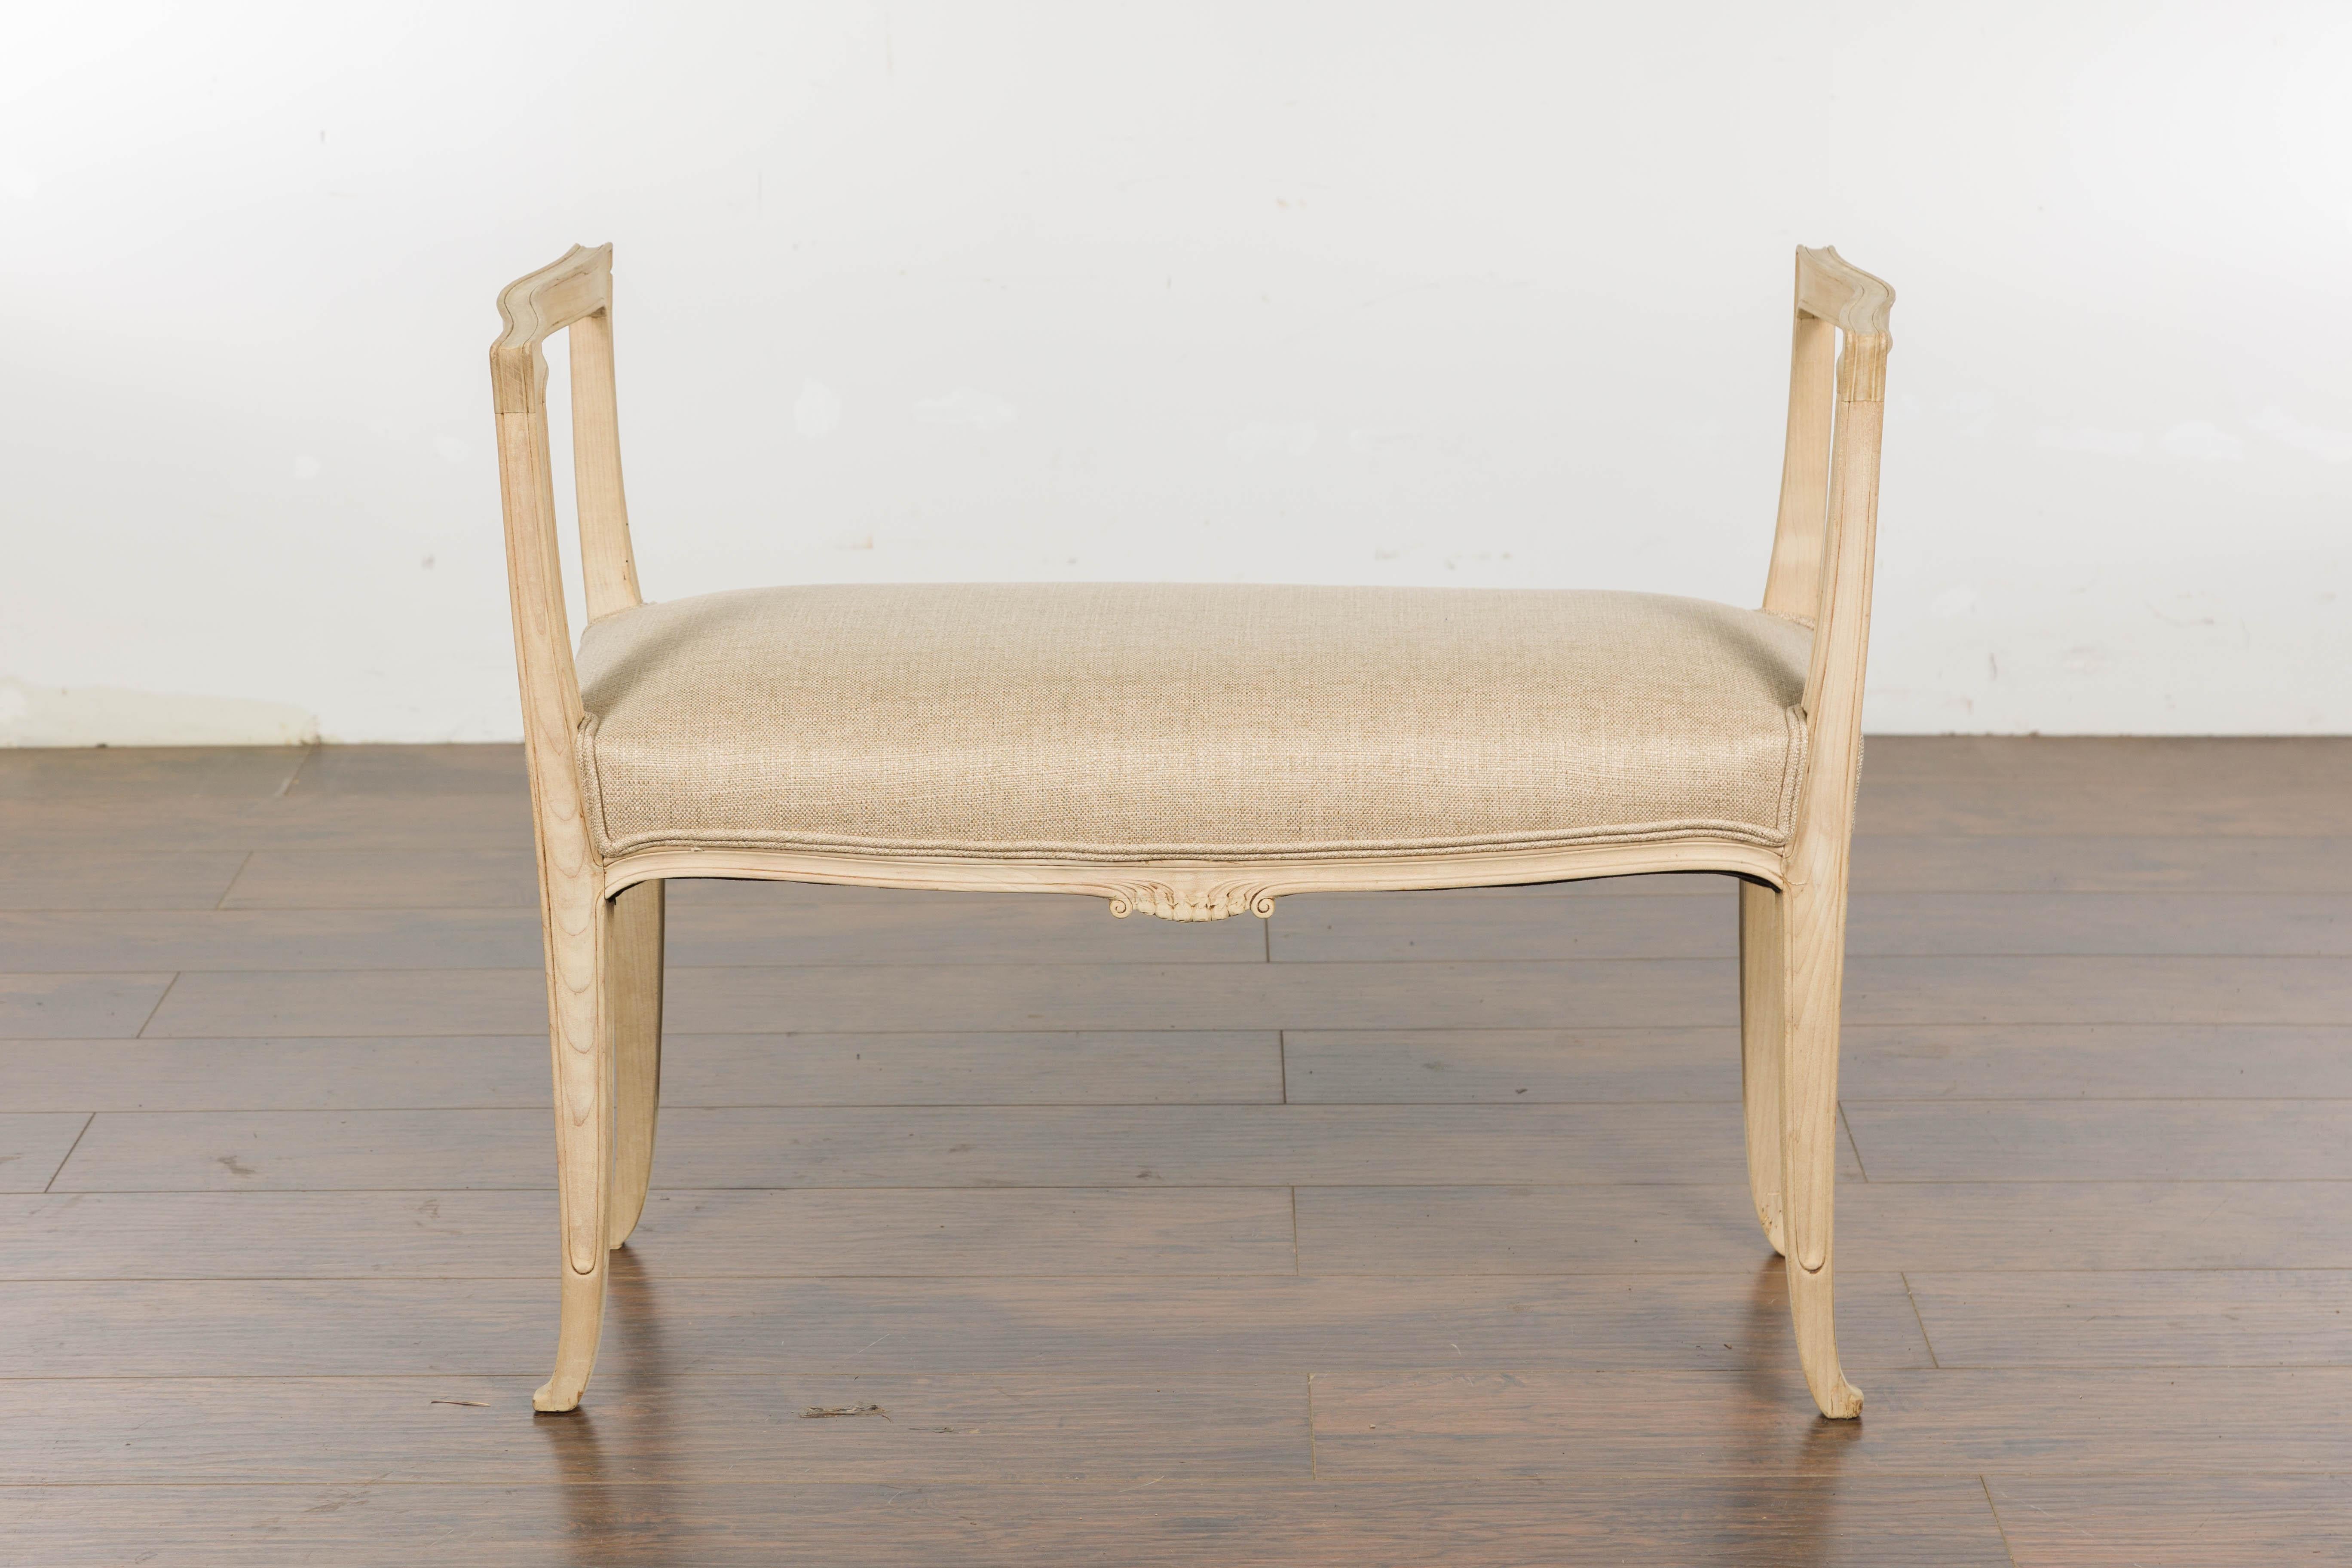 1920s French Carved Walnut Upholstered Bench with Natural Finish For Sale 8